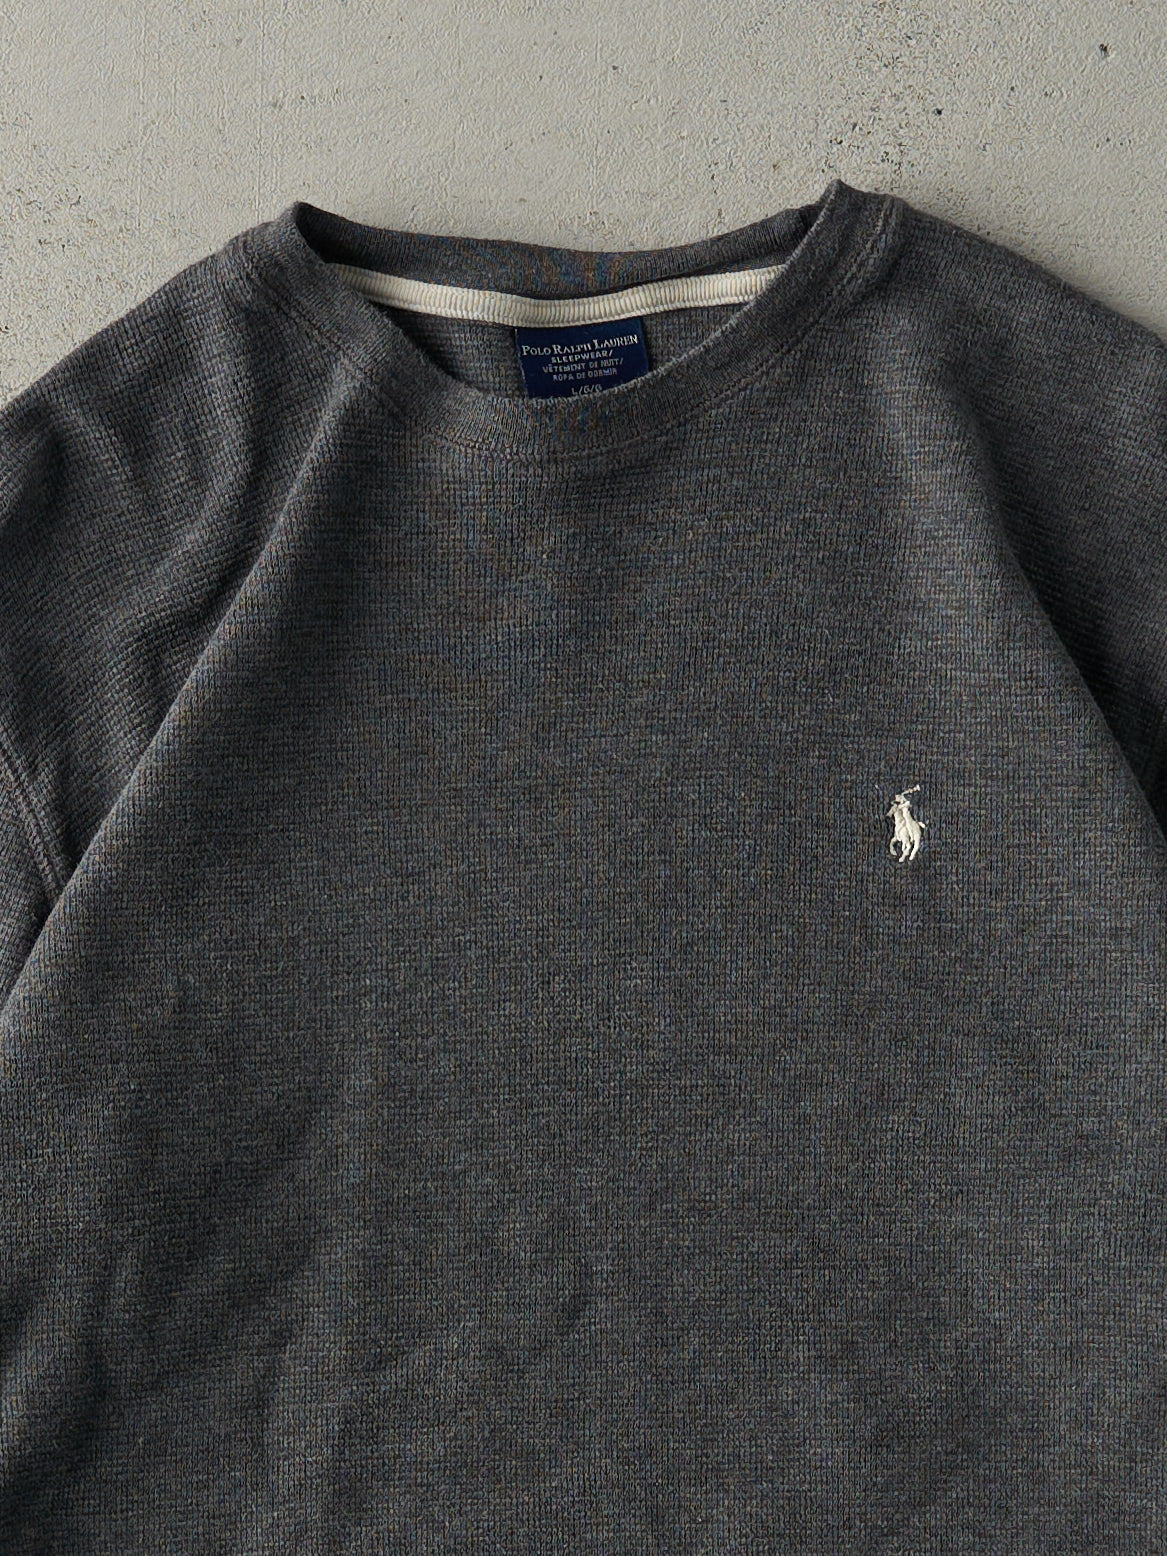 Vintage Y2K Grey Polo by Ralph Lauren Waffle Knit Long Sleeve (M)